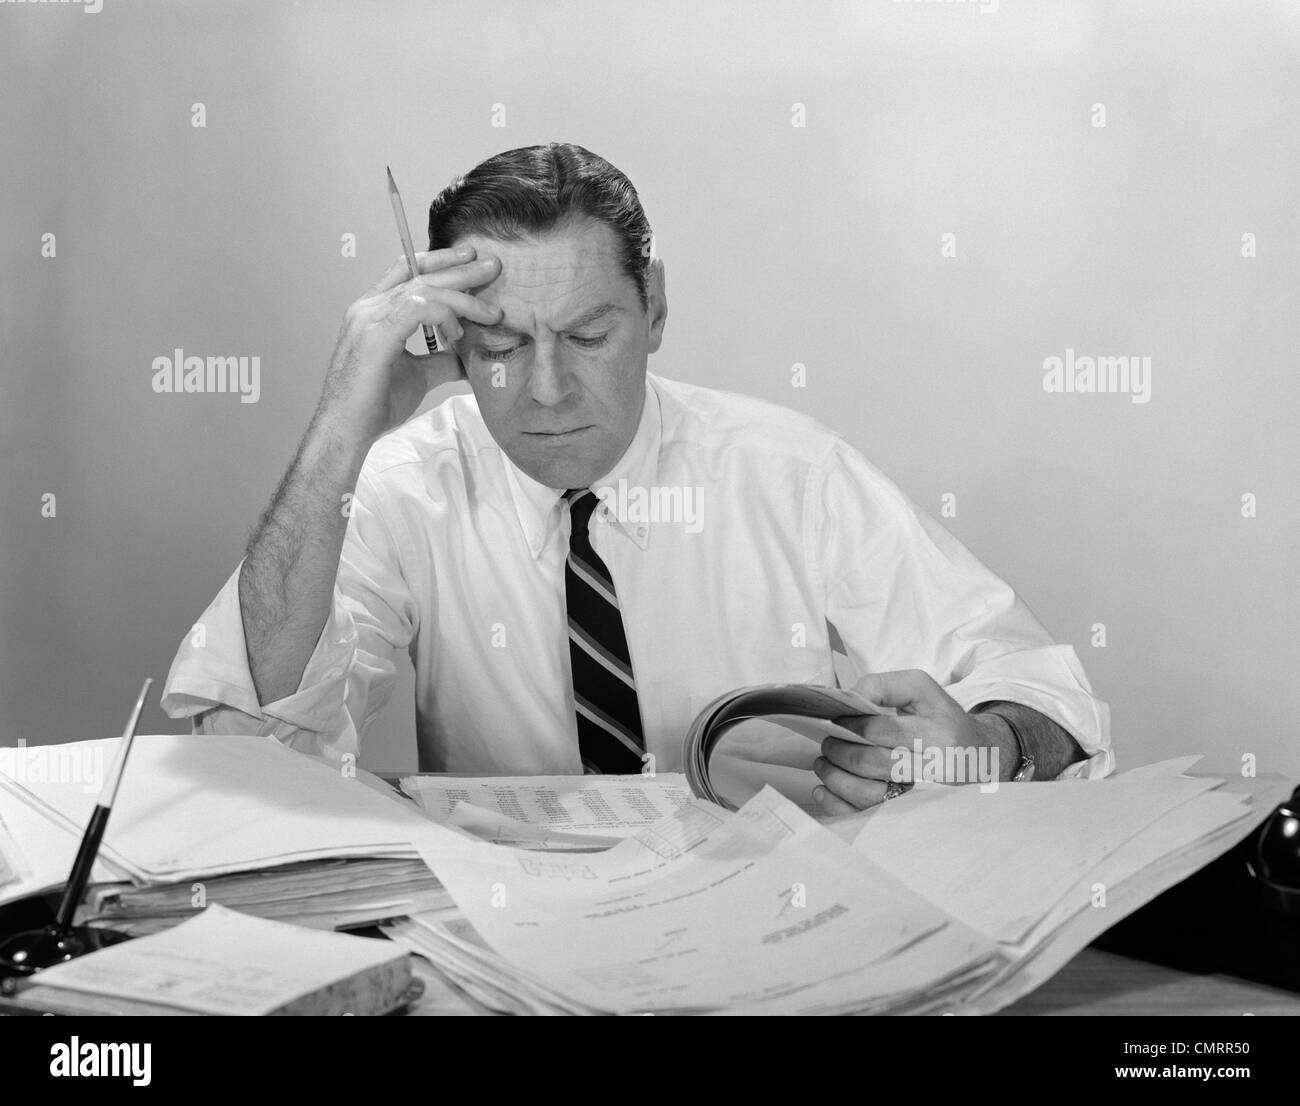 1960s BUSINESSMAN DESK FULL PAPERS HAND TO FOREHEAD SERIOUS EXPRESSION Stock Photo